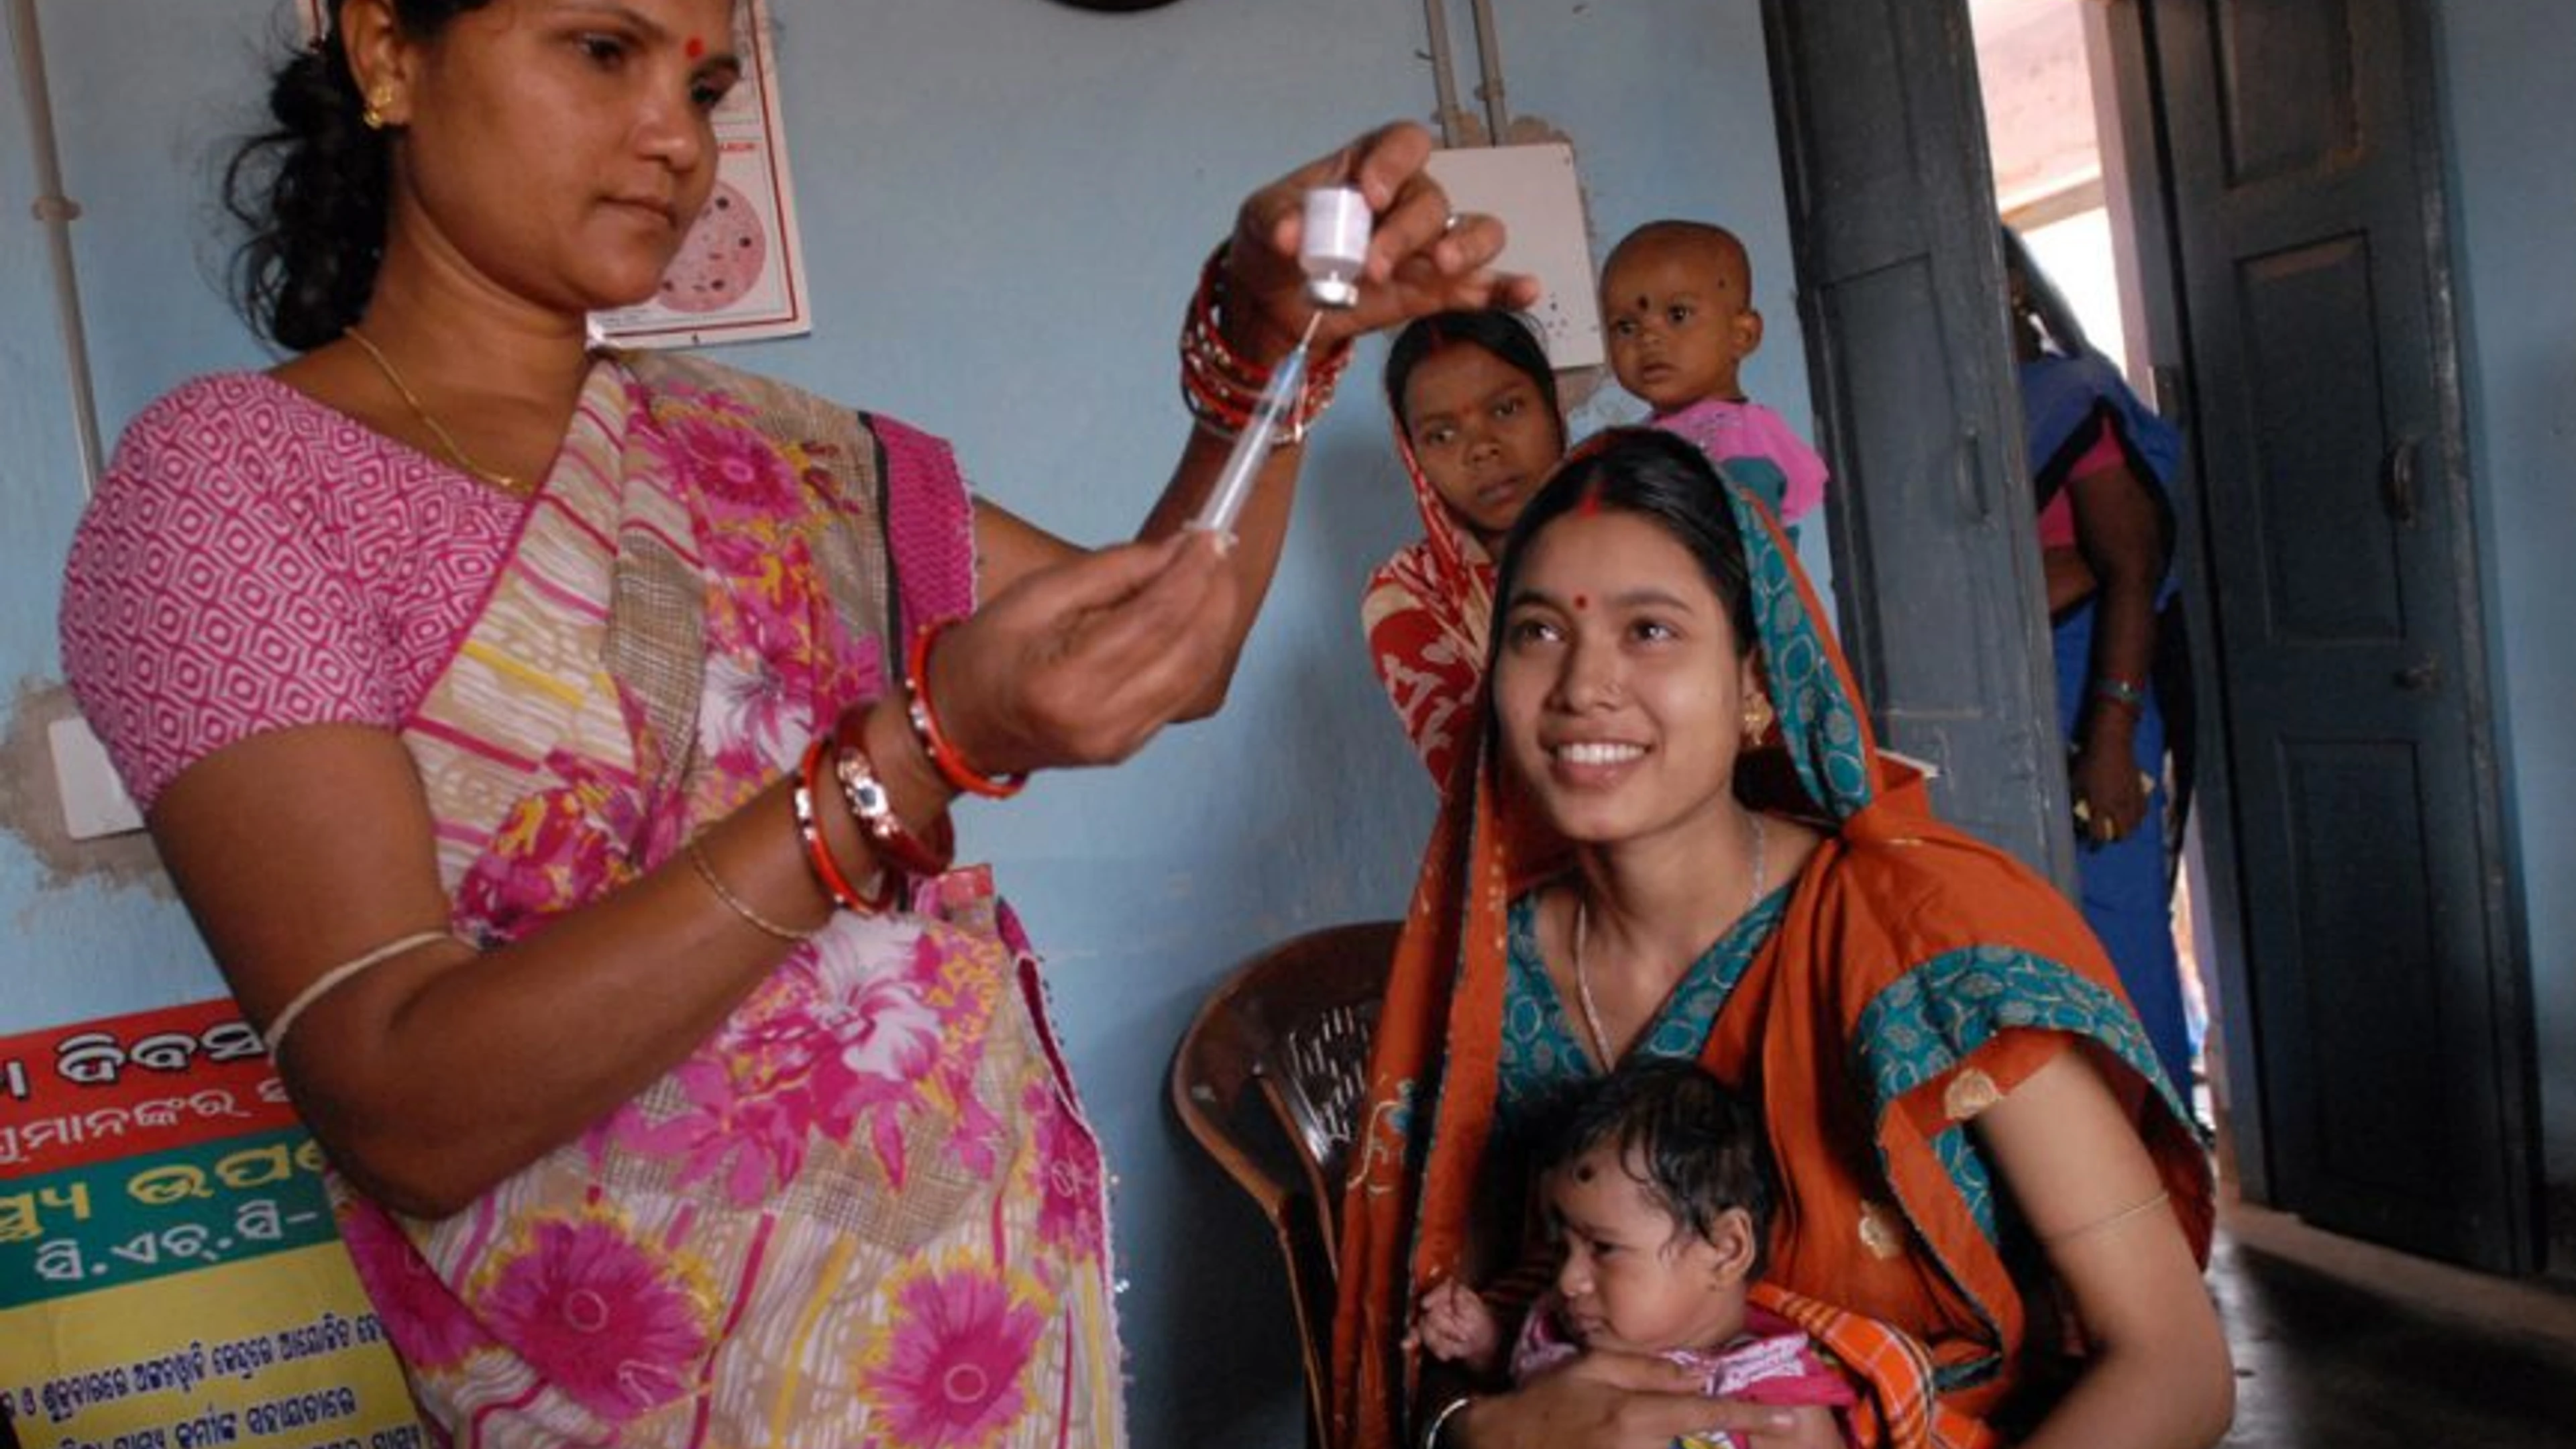 Vaccination in India (source flickr DFID, UK aid, creative commons)